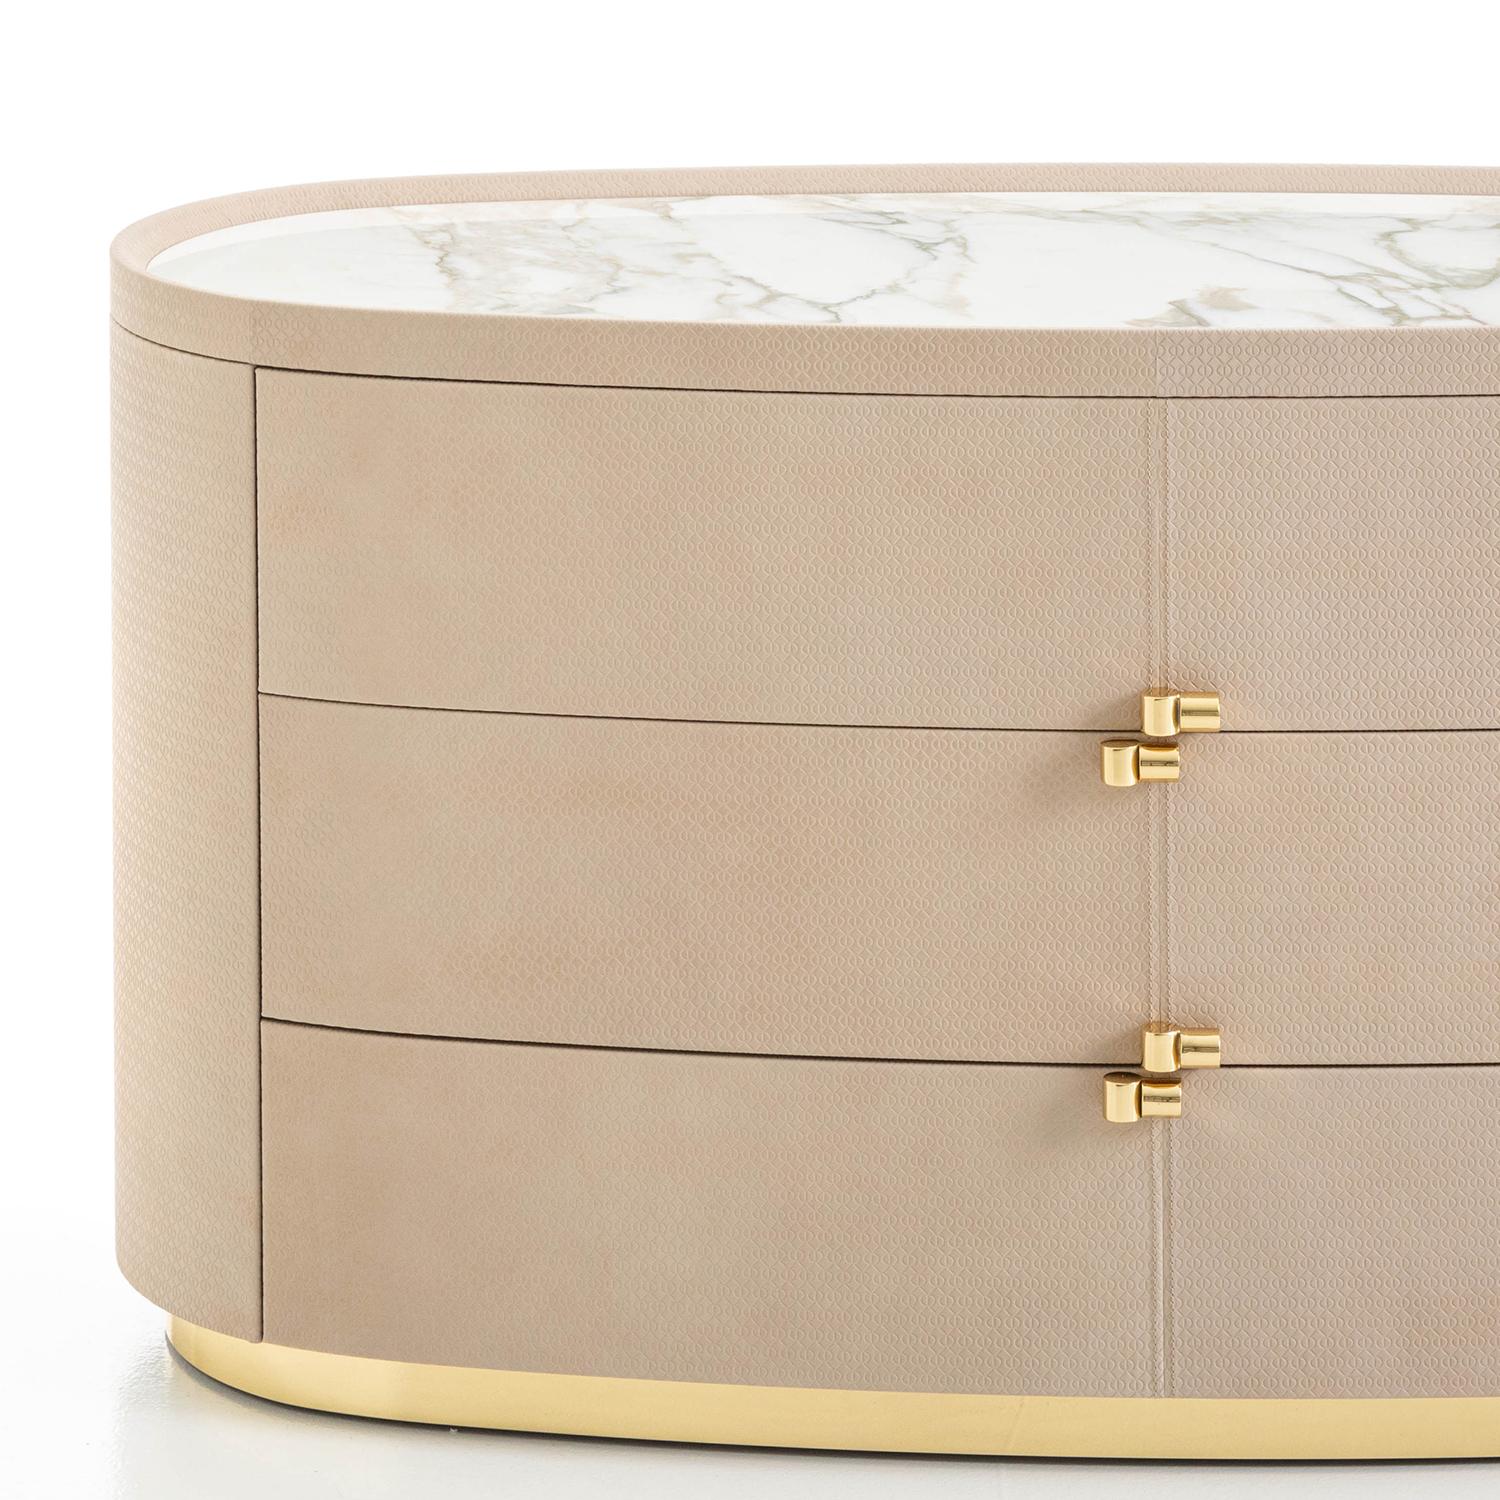 Chest of drawers chelby with solid wood structure
upholstered and covered with genuine Italian leather.
With valentin grey marble top and with solid brass base
in pollished finish. Chest with 3 drawers with solid brass
handles in polished finish.